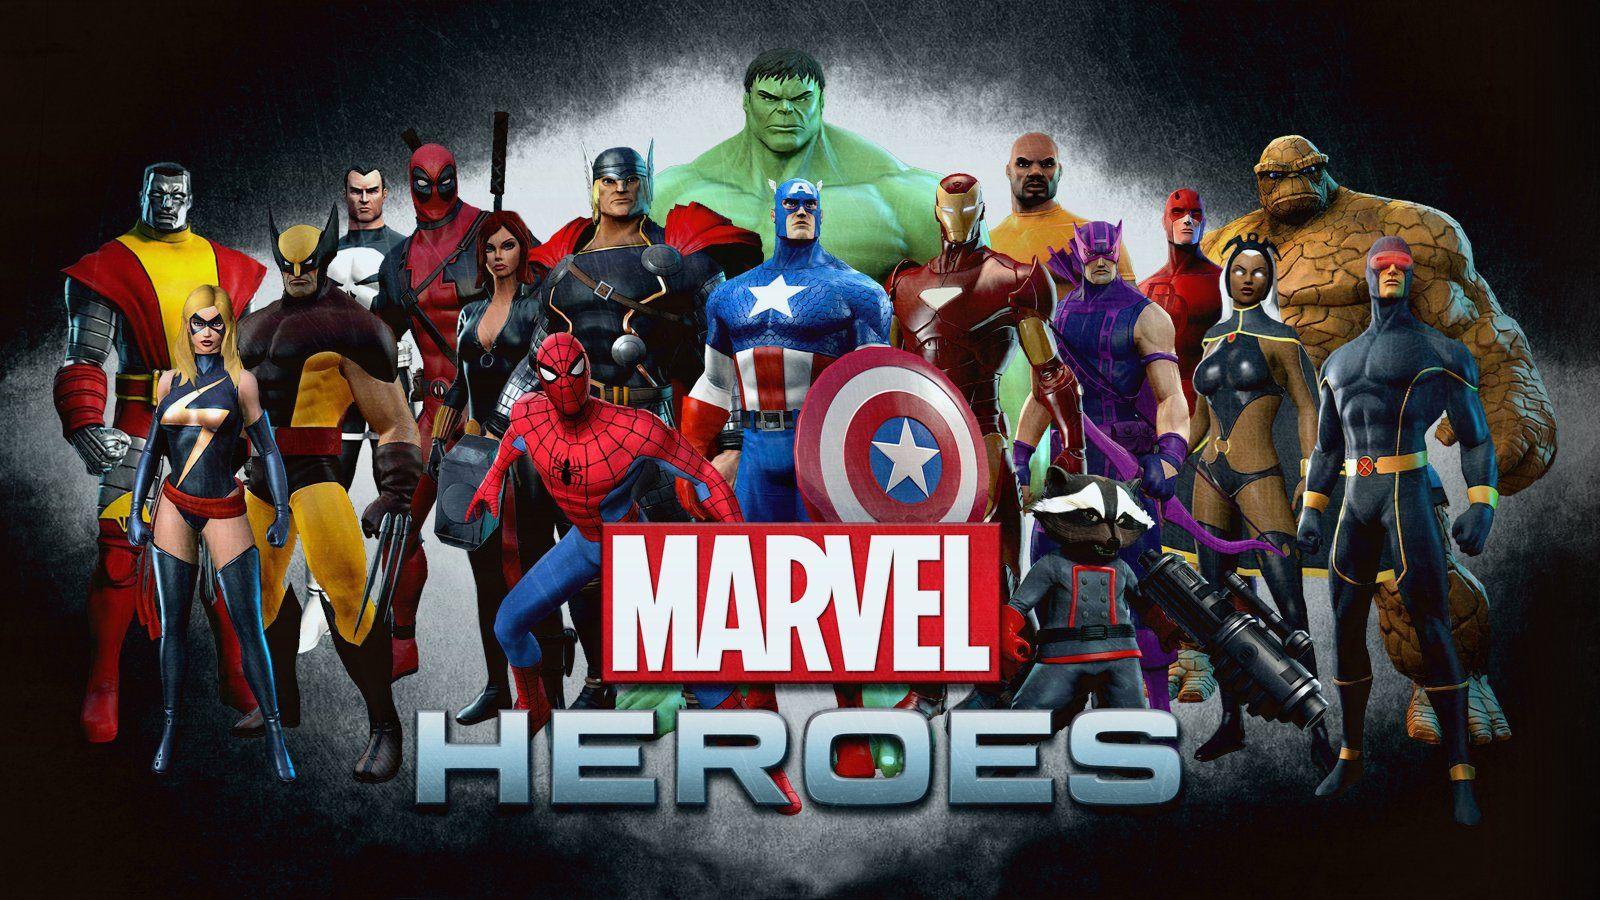 Marvel Heroes Wallpaper and Background Imagex900